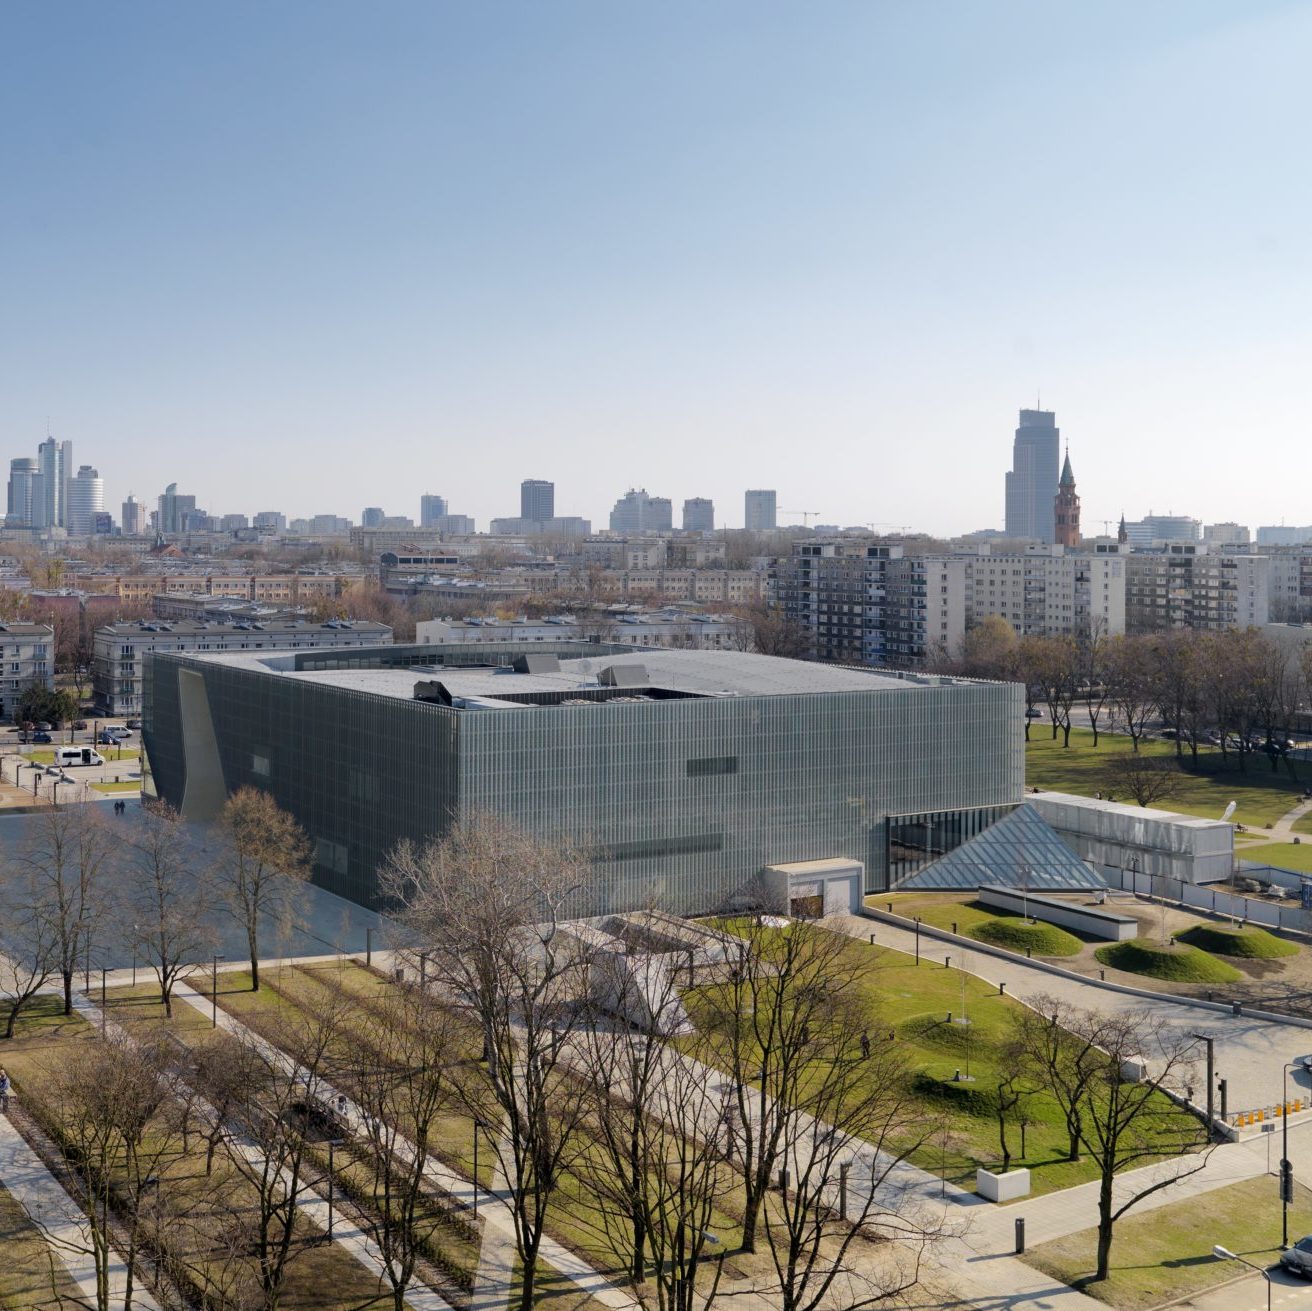 Discover one of Europe's newest and highly regarded museums, Polin, dedicated to the history of Polish Jews.